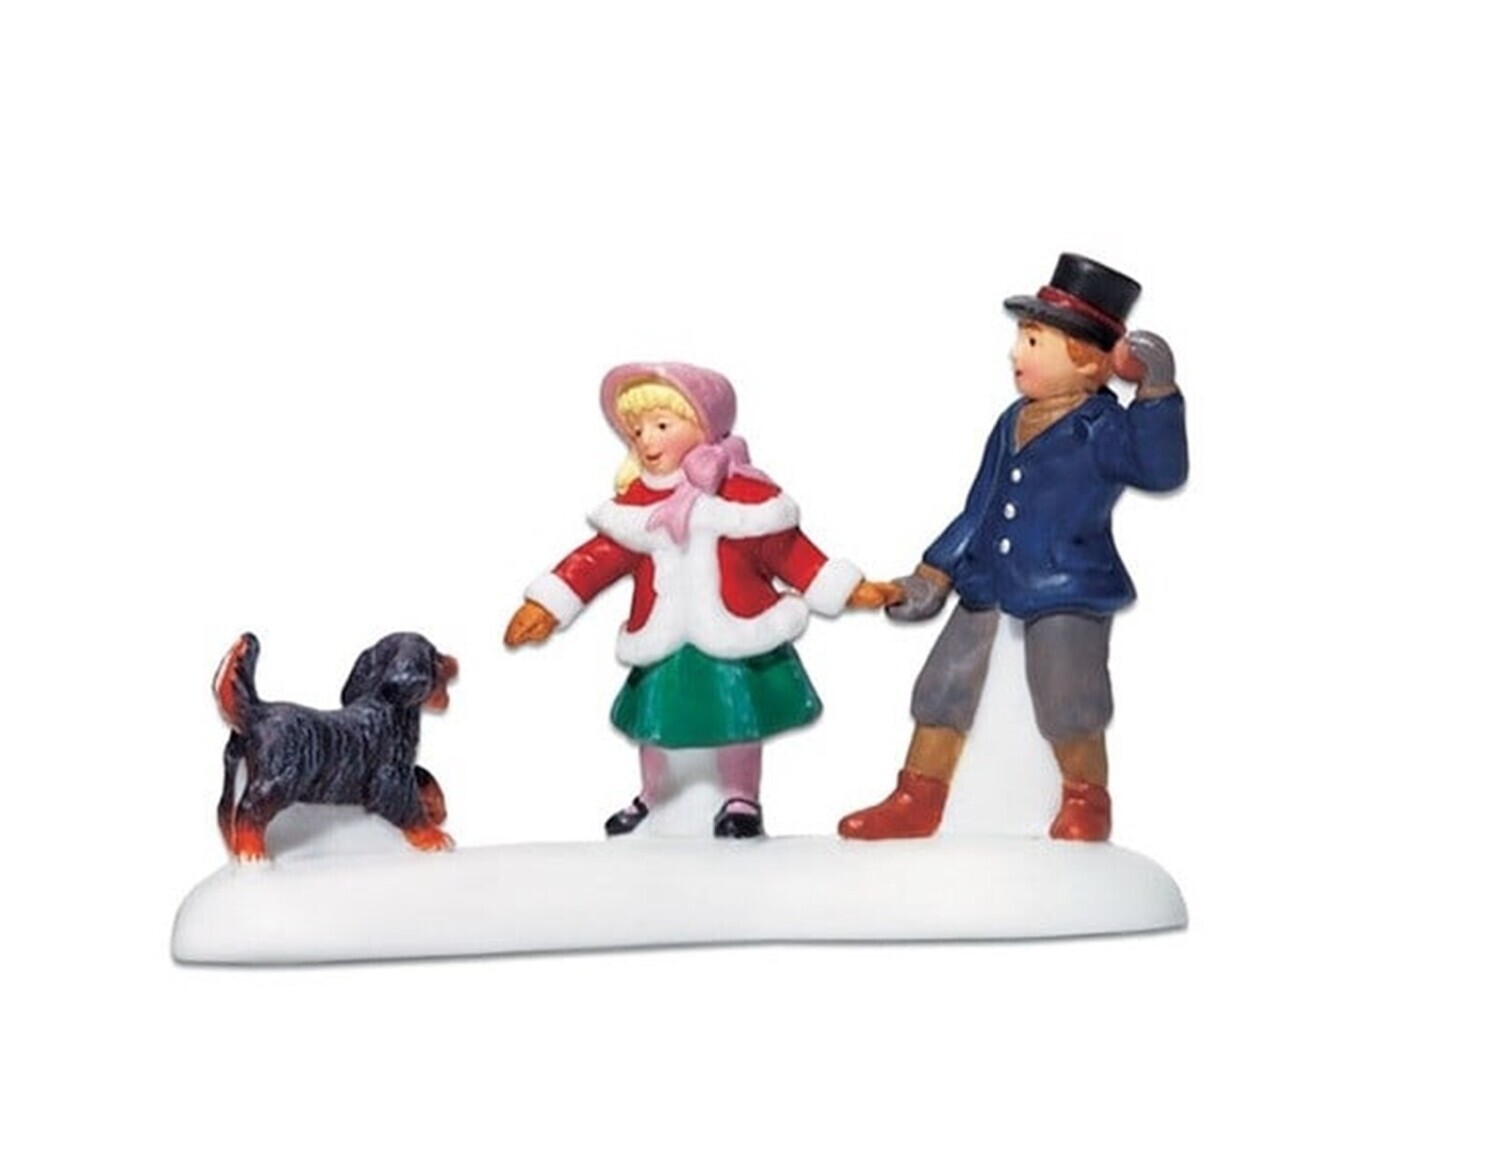 Department 56 Dickens Village "Playing with a Puppy" Village Accessory (56.58811)